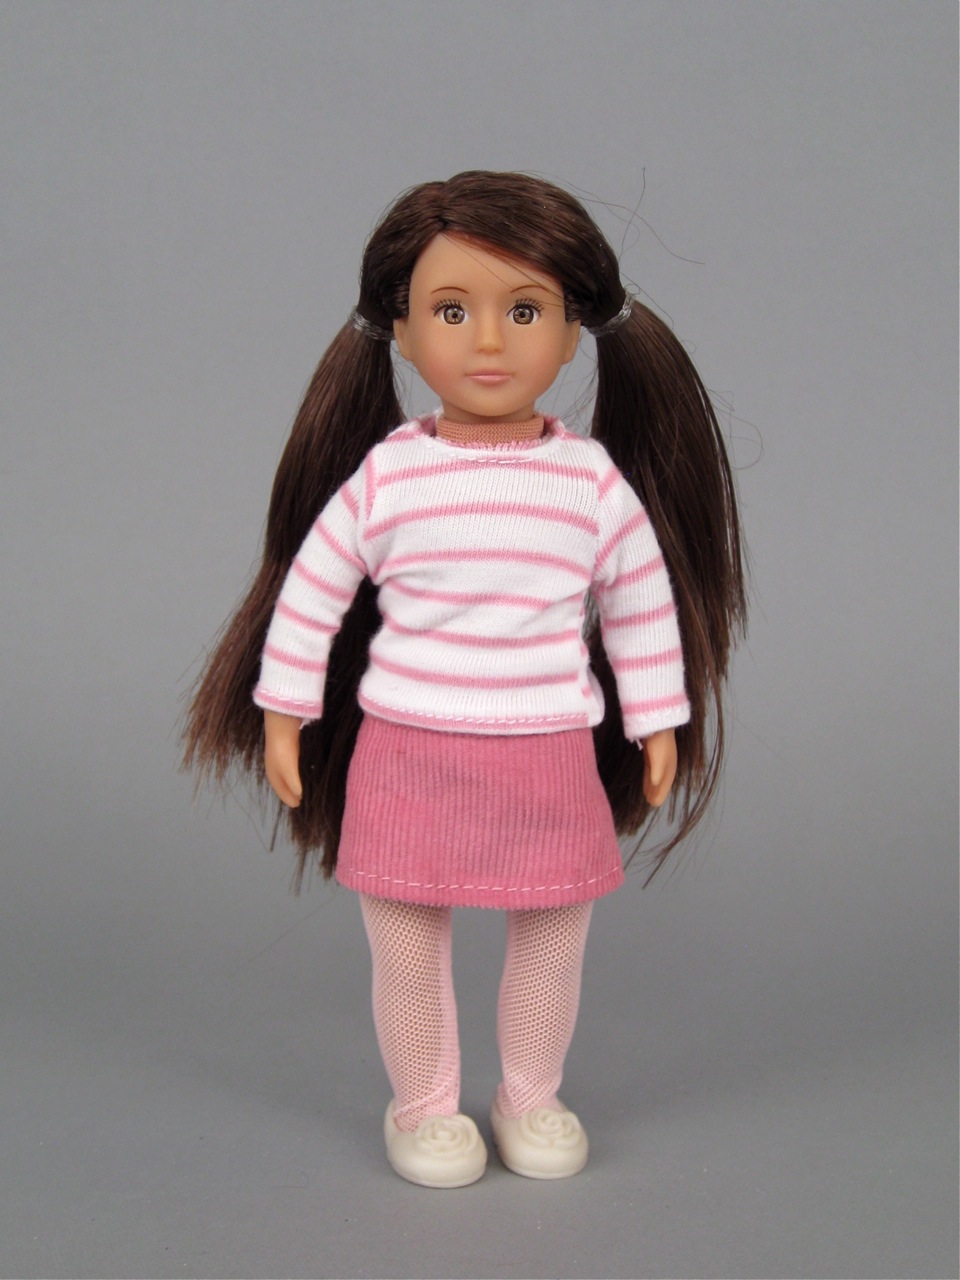 Our Generation Dolls by Battat | The Toy Box Philosopher